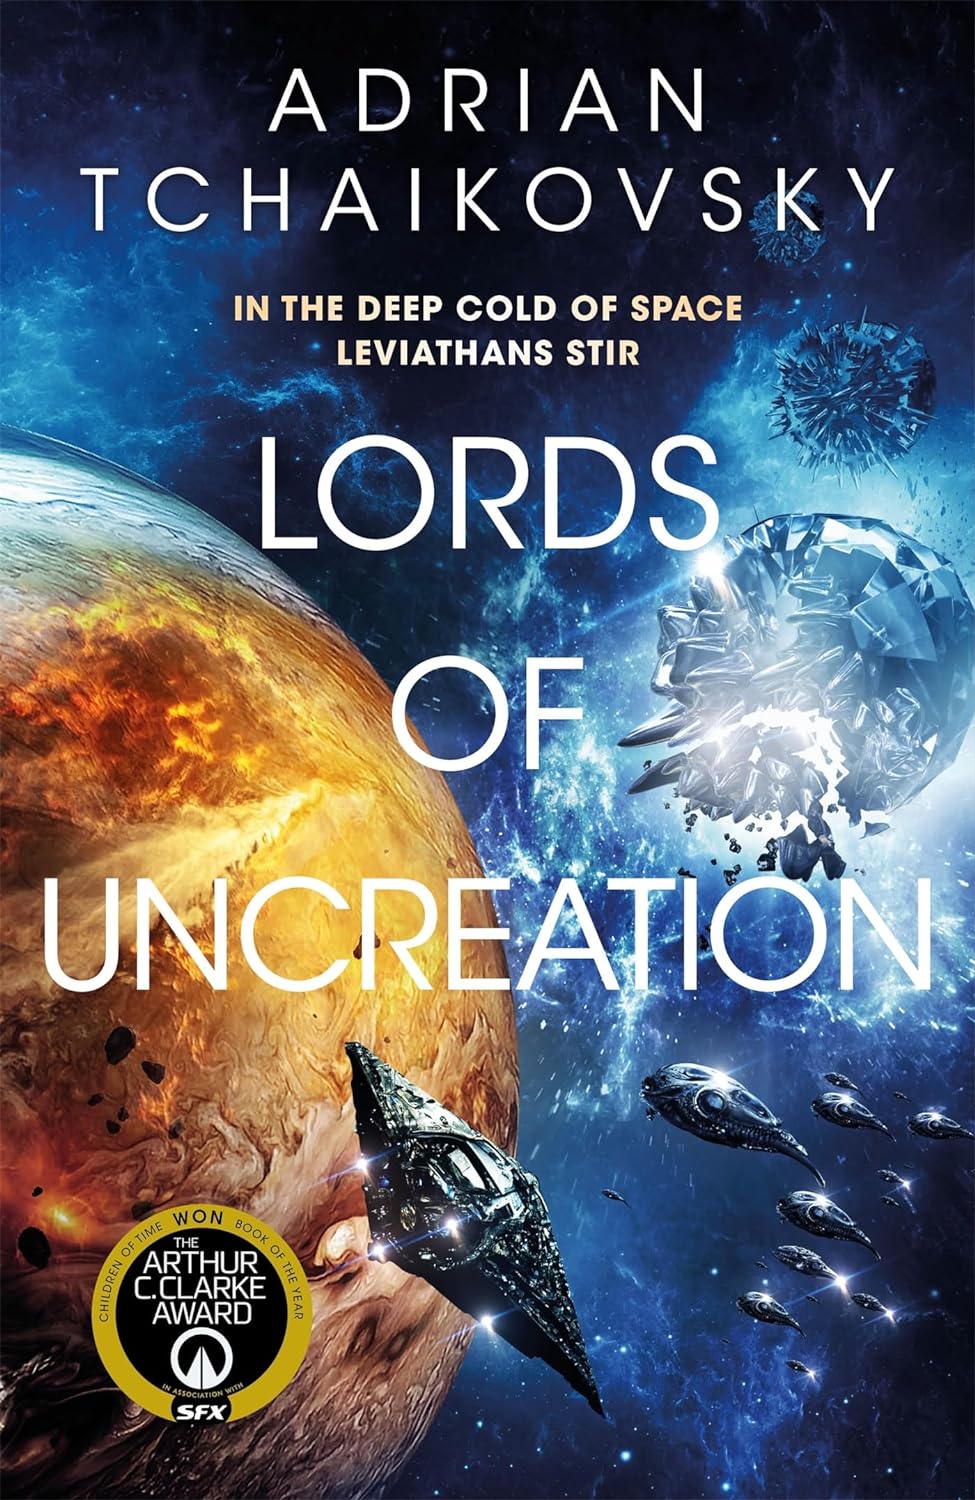 Lords of Uncreation | Adrian Tchaikovsky